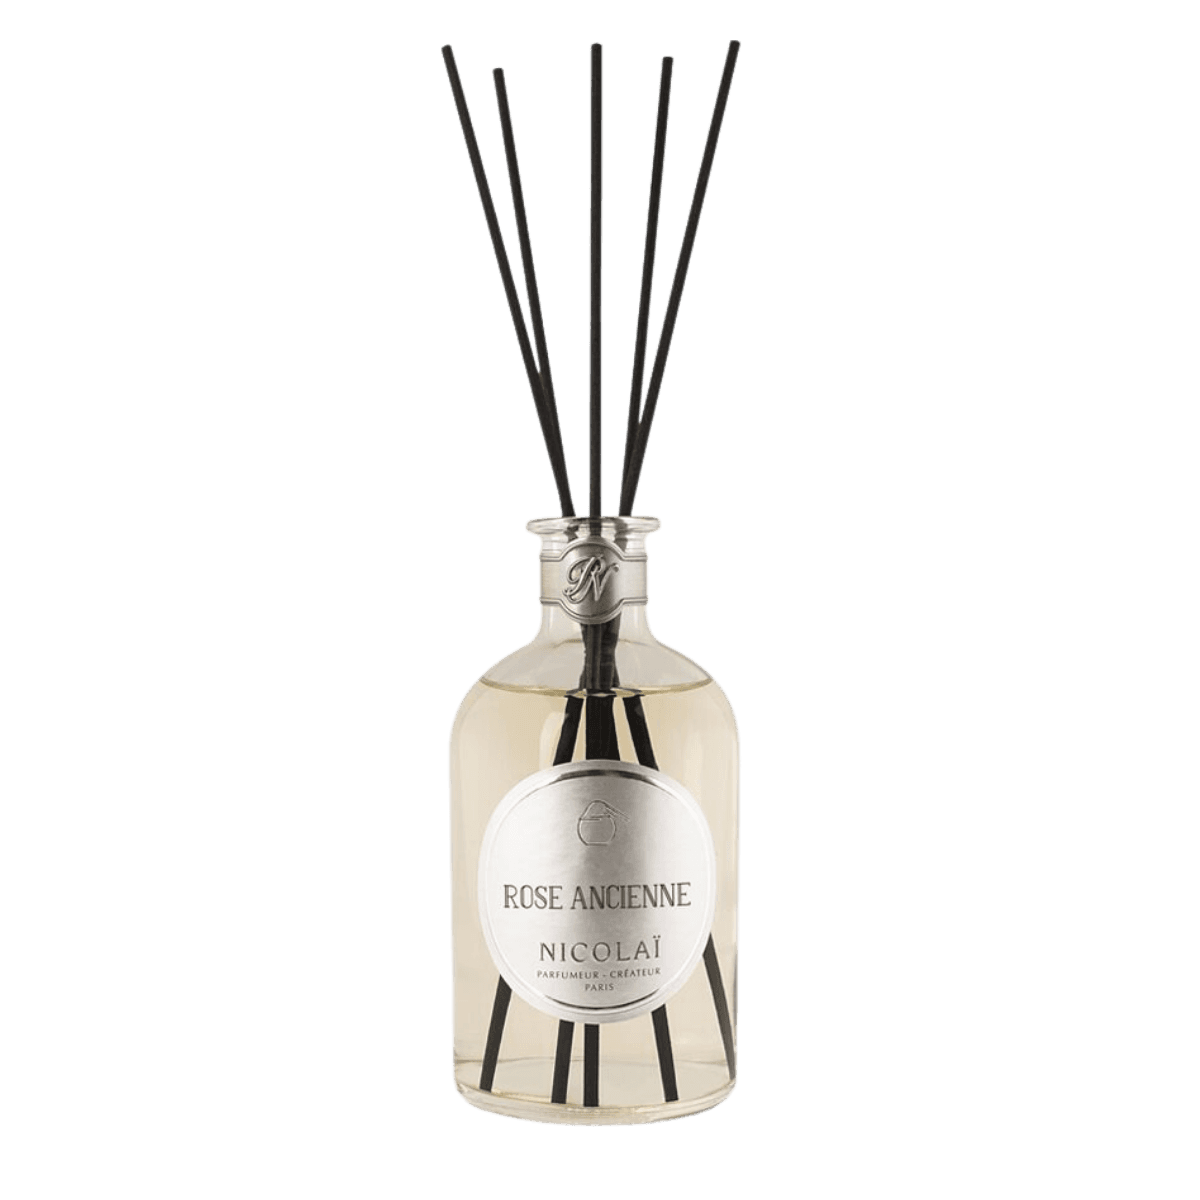 Image of Rose Ancienne reed diffuser by Nicolai